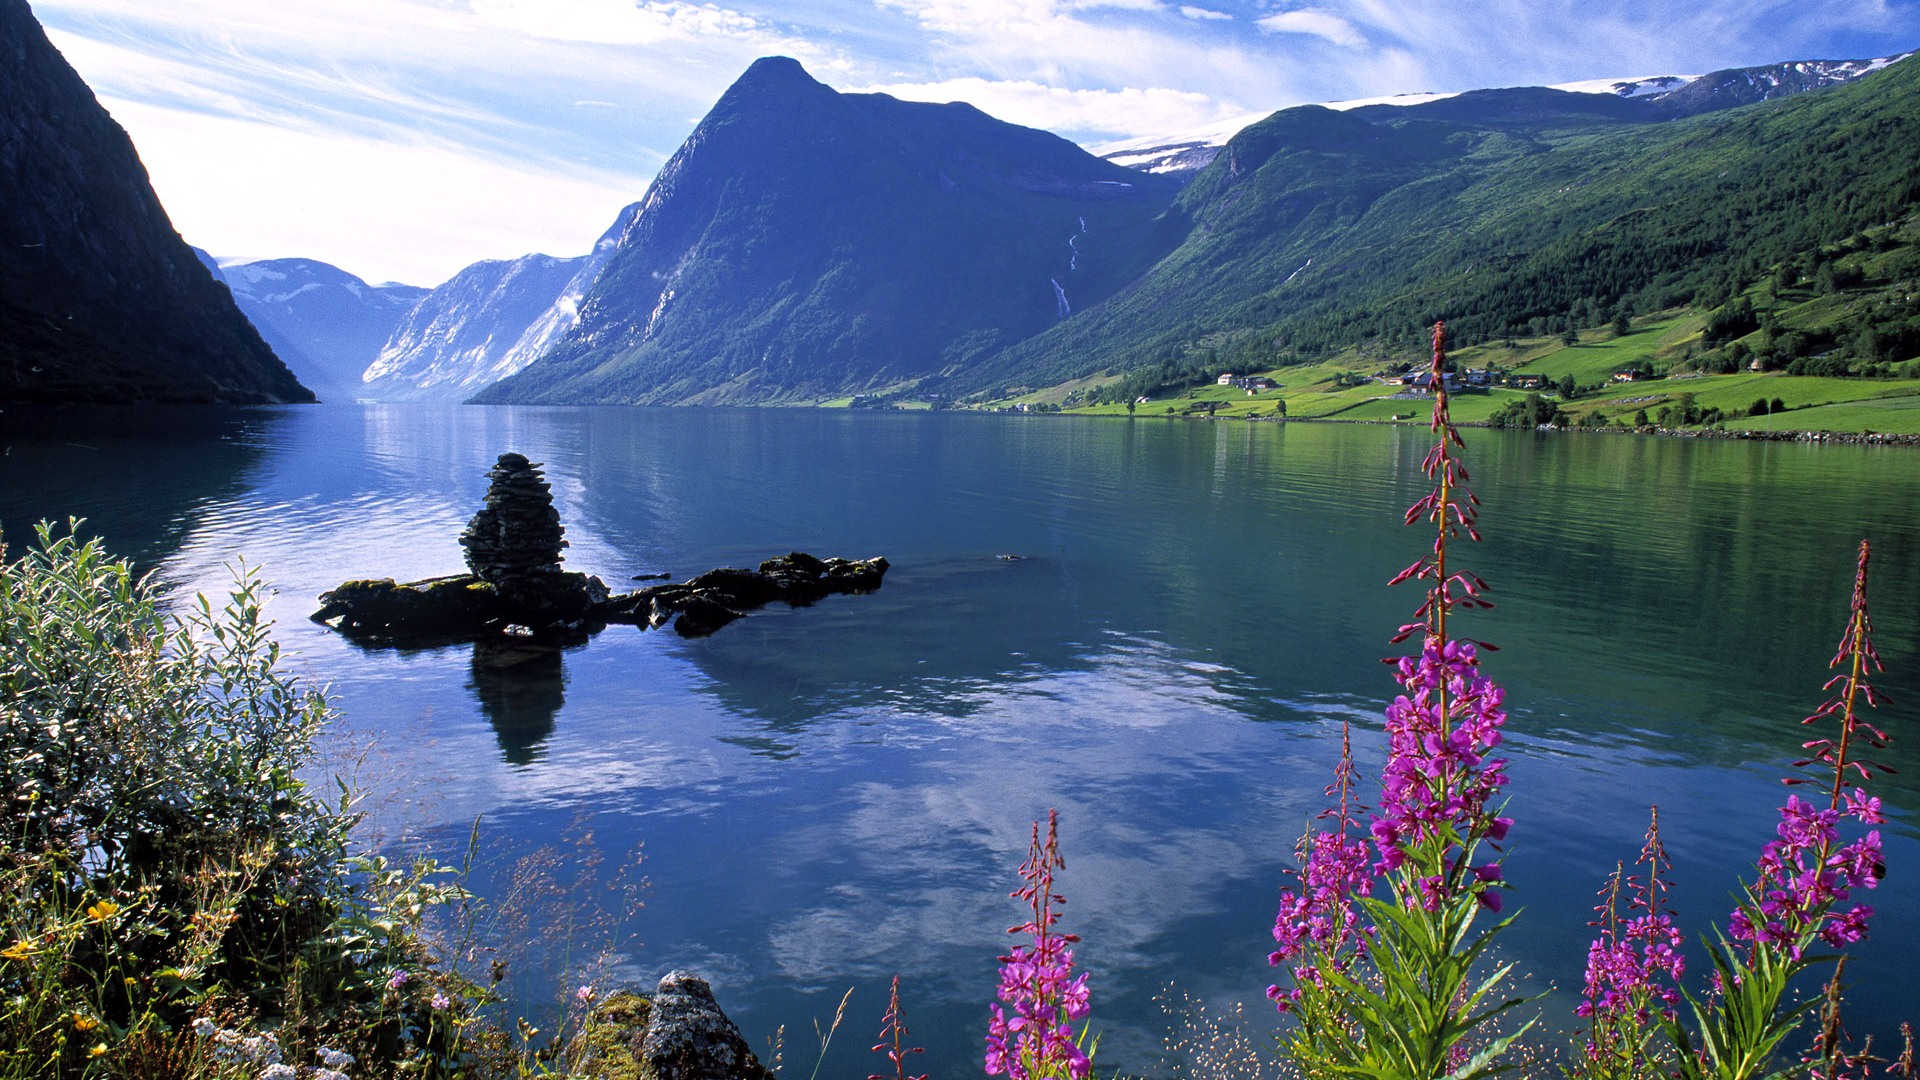 Windows 7 Wallpapers: Nordic Landscapes #5 - 1920x1080